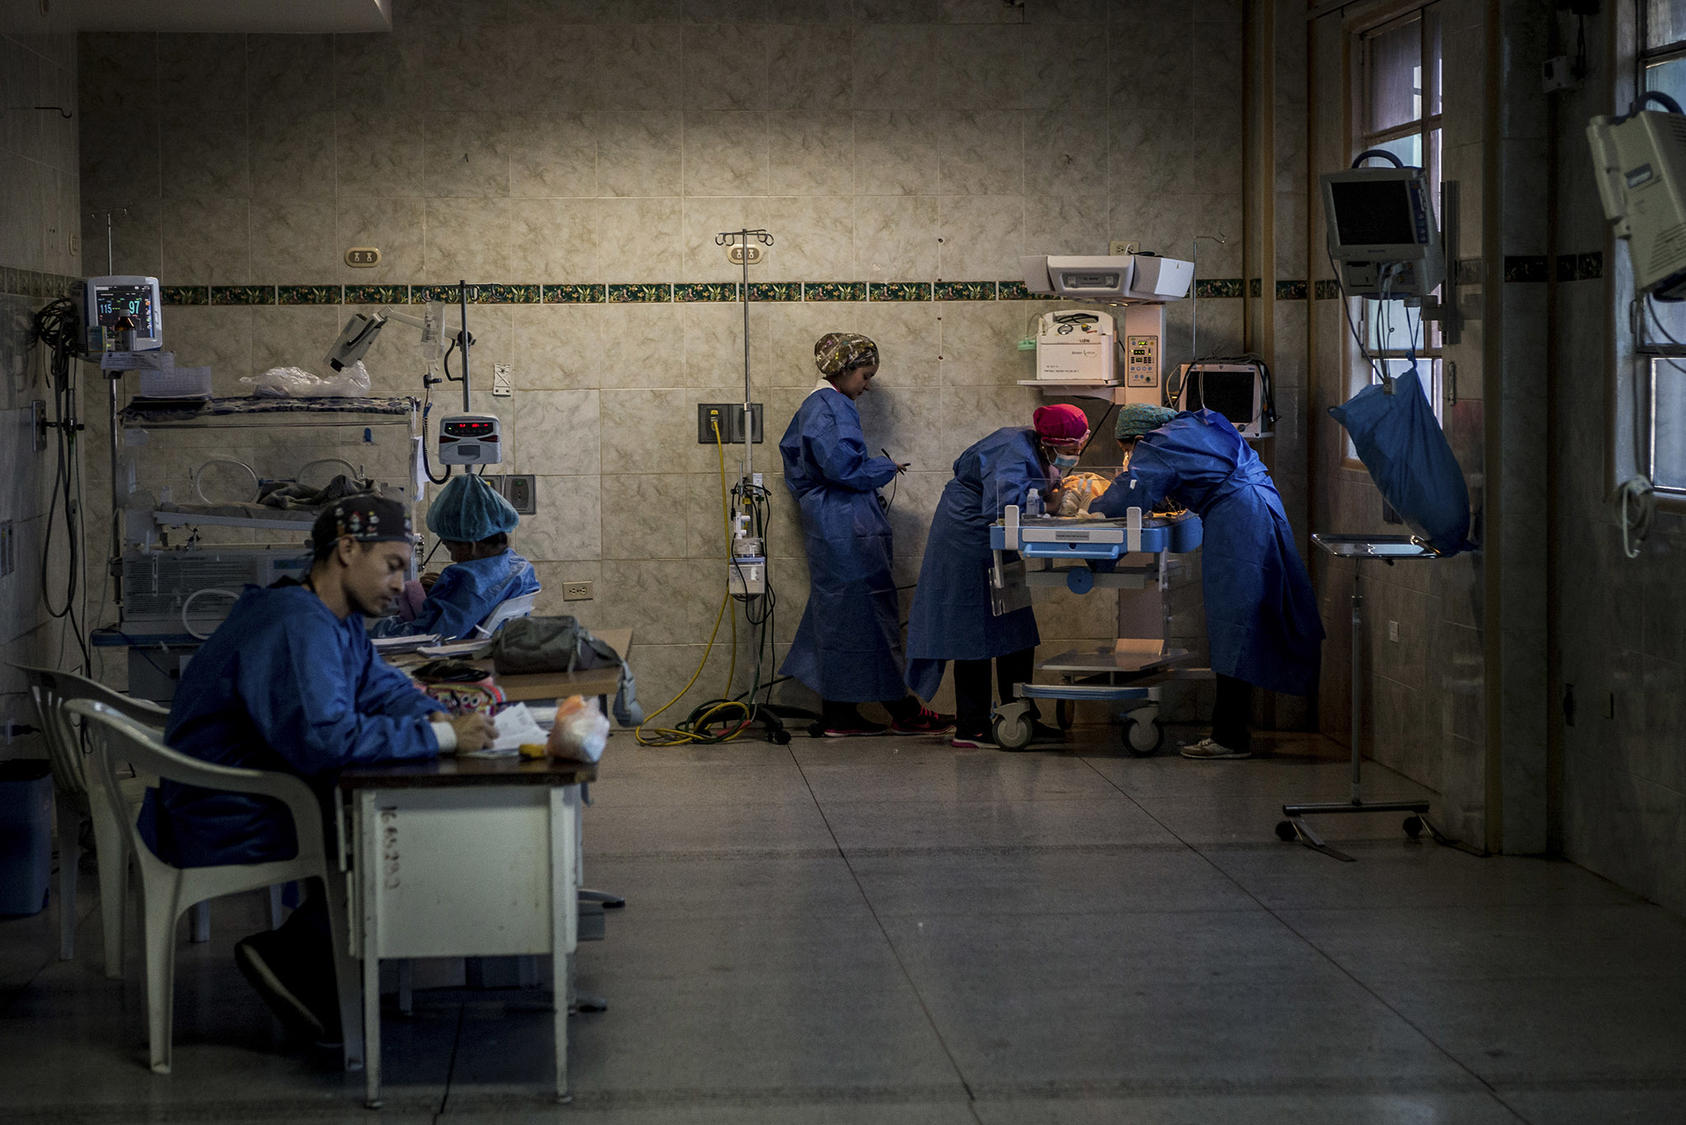 Staff work in the neonatal intensive care ward of the Central Hospital in San Cristobal, Venezuela, in 2019. Lacking scrubs, intravenous fluids, even disinfectant, doctors routinely must ask parents to buy supplies. (Meridith Kohut/The New York Times)